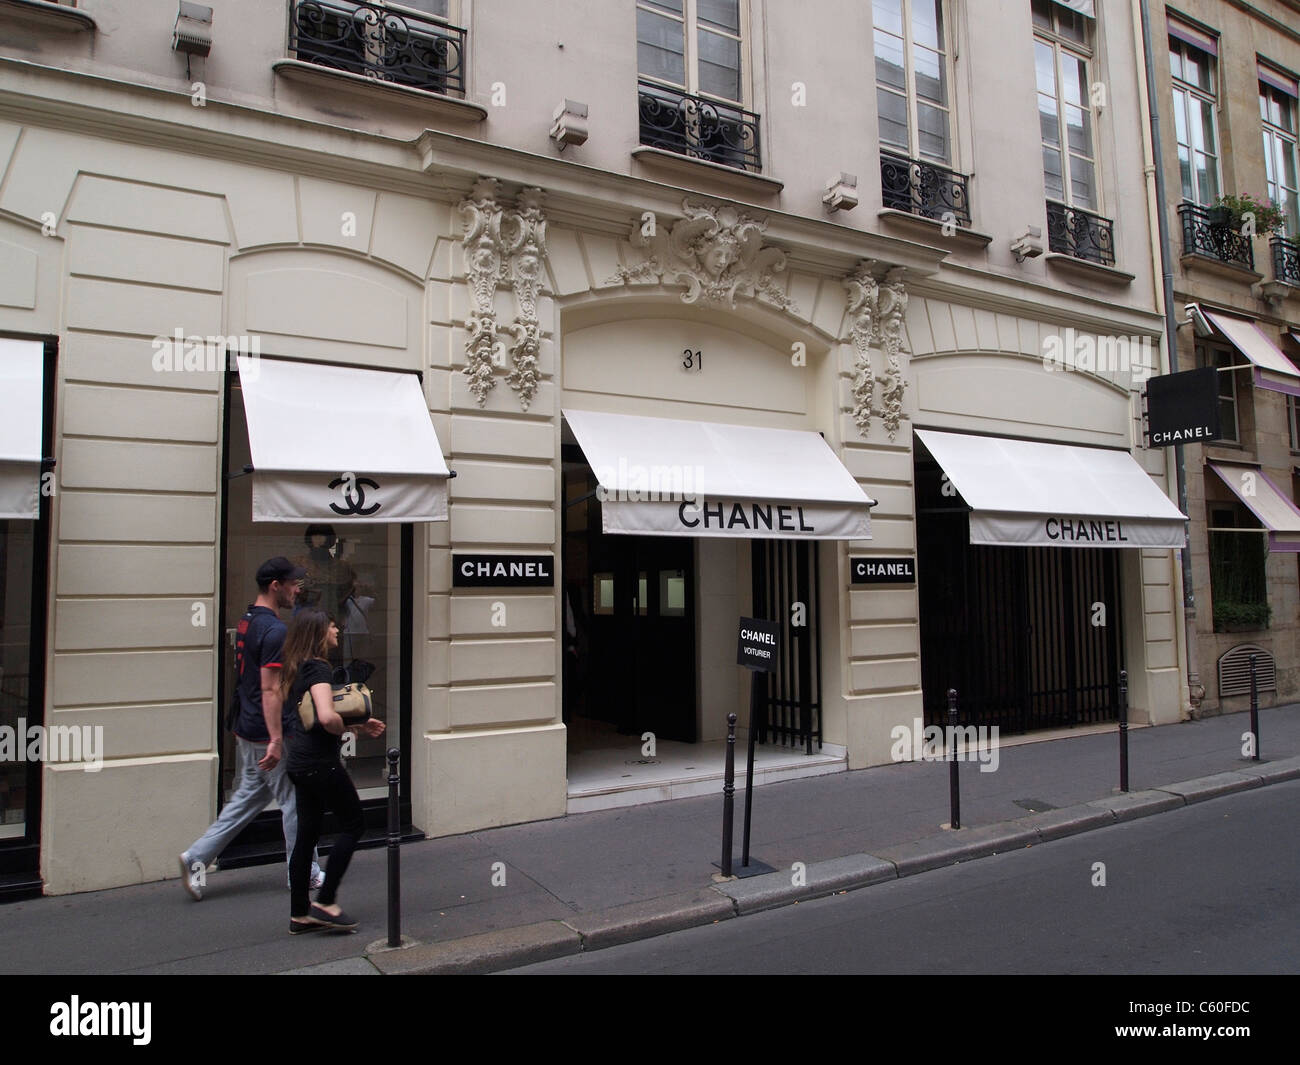 The famous Chanel shop Rue Cambon 31 in Paris, France. This fashion shop  was founded by Coco Chanel in 1915 Stock Photo - Alamy